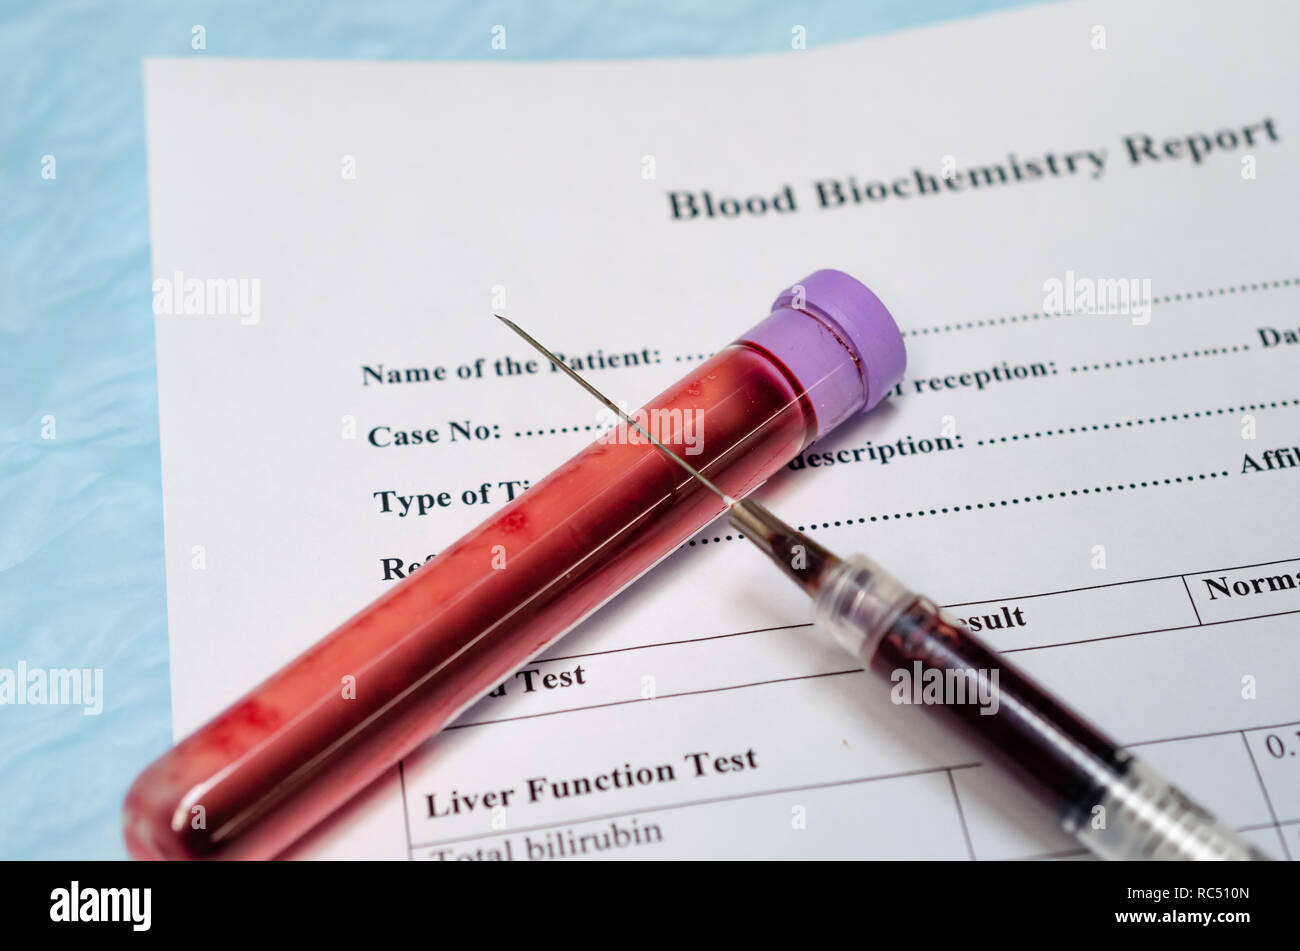 Collection of blood for blood biochemistry analysis for metabolic diseases Stock Photo